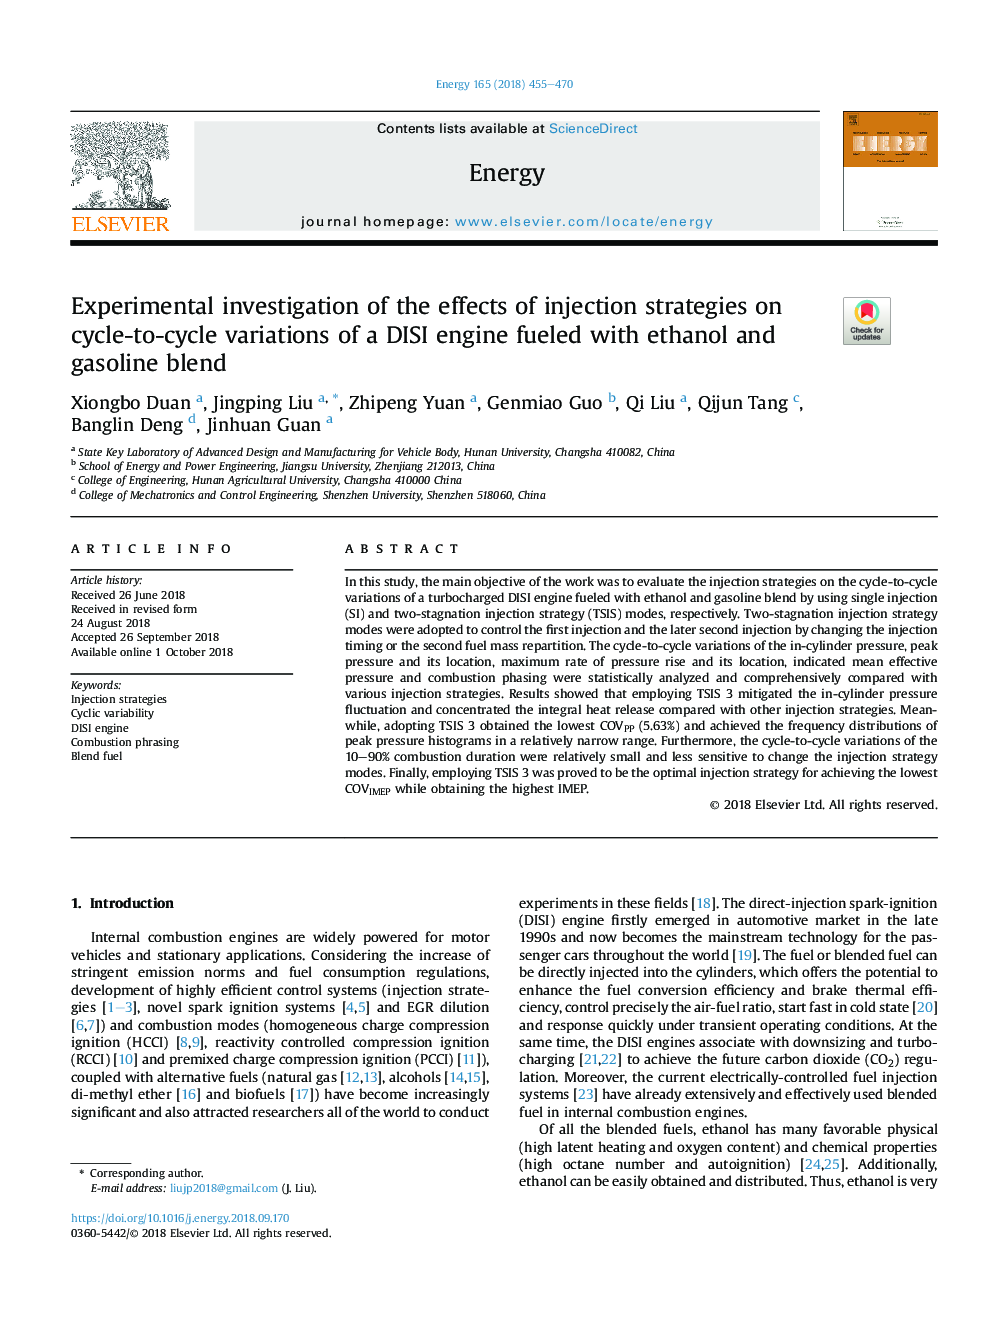 Experimental investigation of the effects of injection strategies on cycle-to-cycle variations of a DISI engine fueled with ethanol and gasoline blend